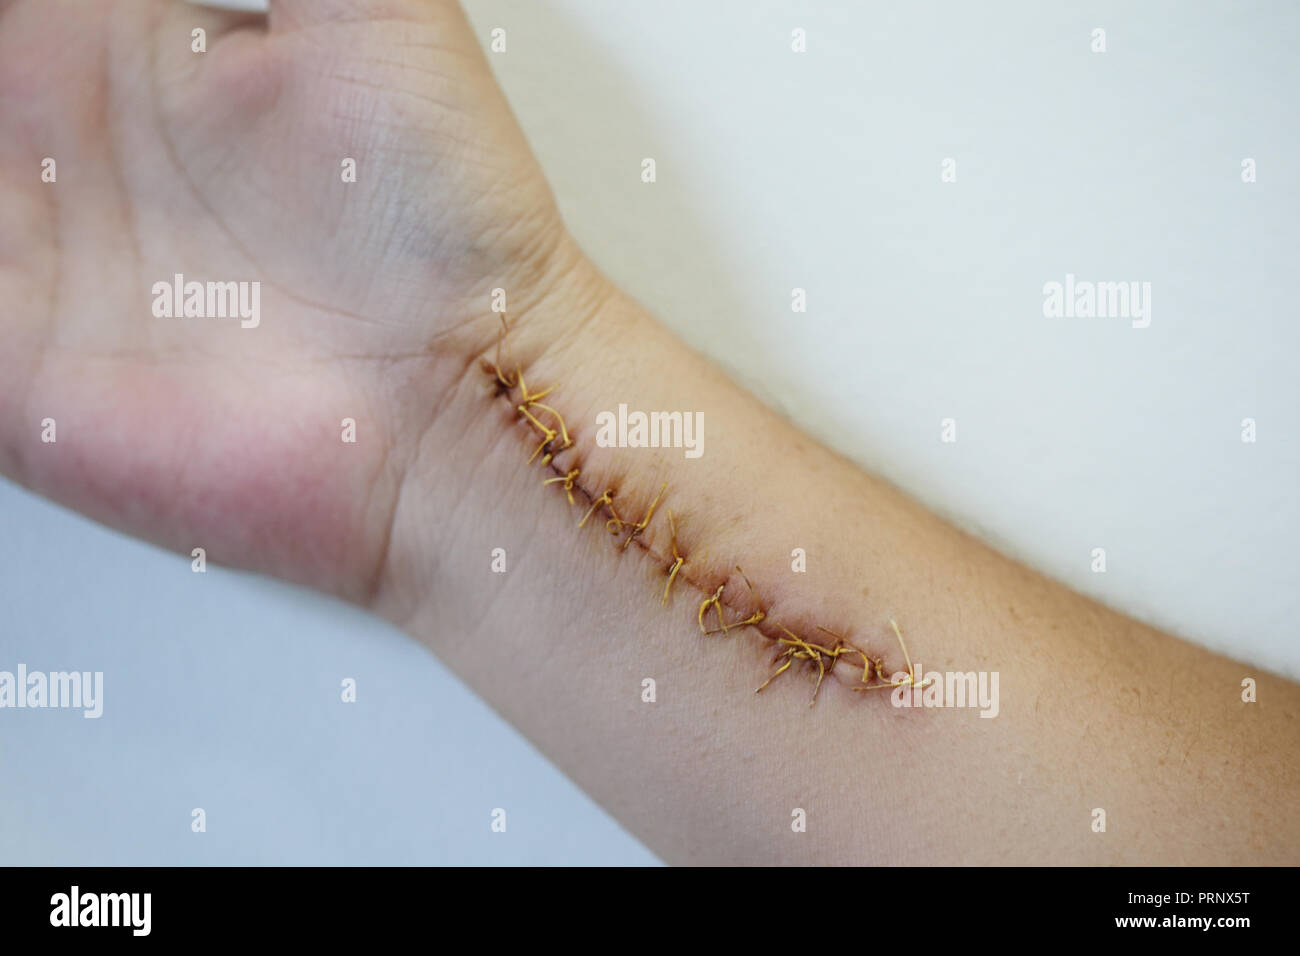 Humand hand hurt with a big scar with a lot of stitches. Horizontal shot Stock Photo